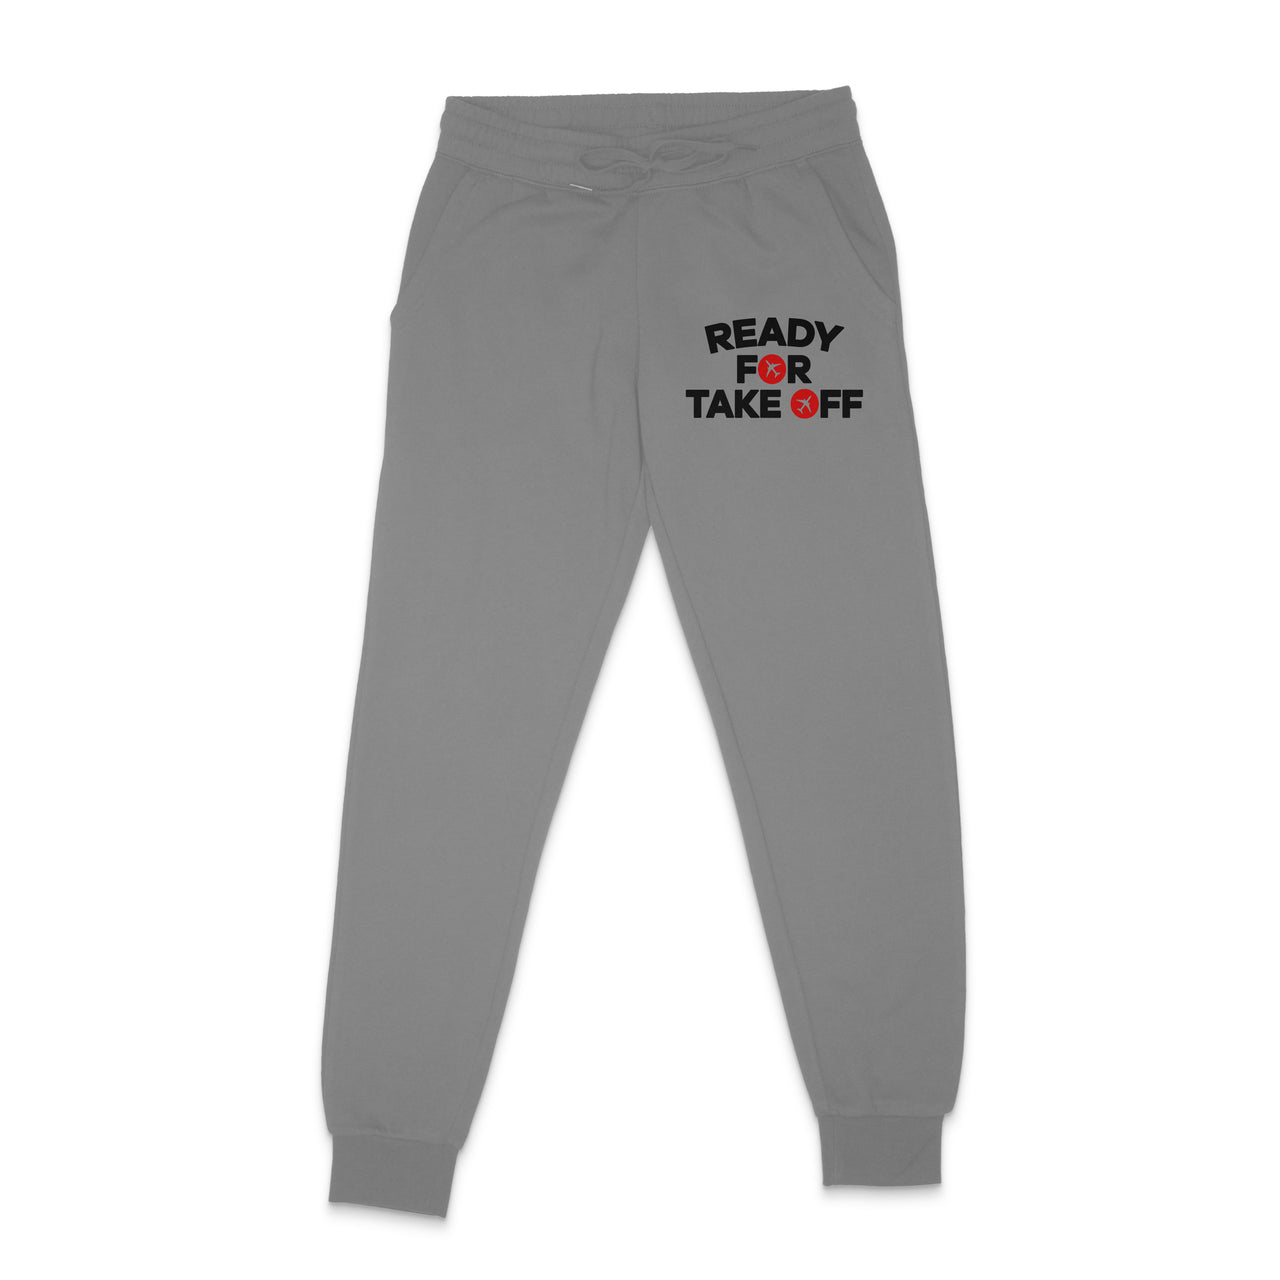 Ready For Takeoff Designed Sweatpants